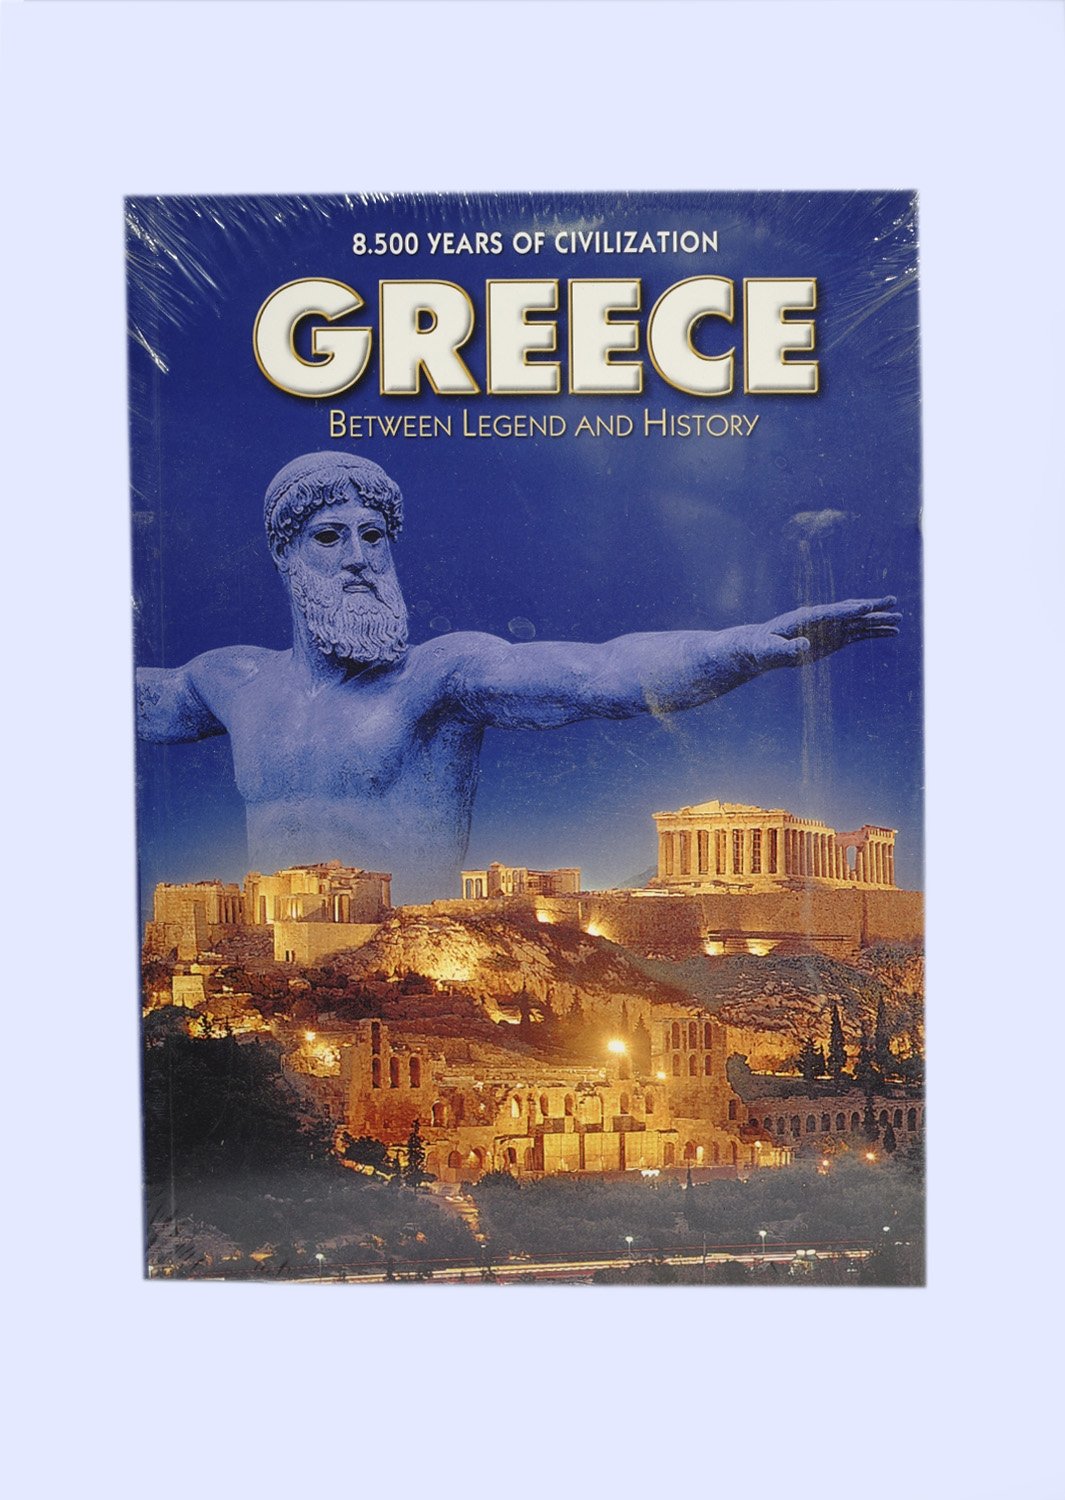 Greece, between legend and history book